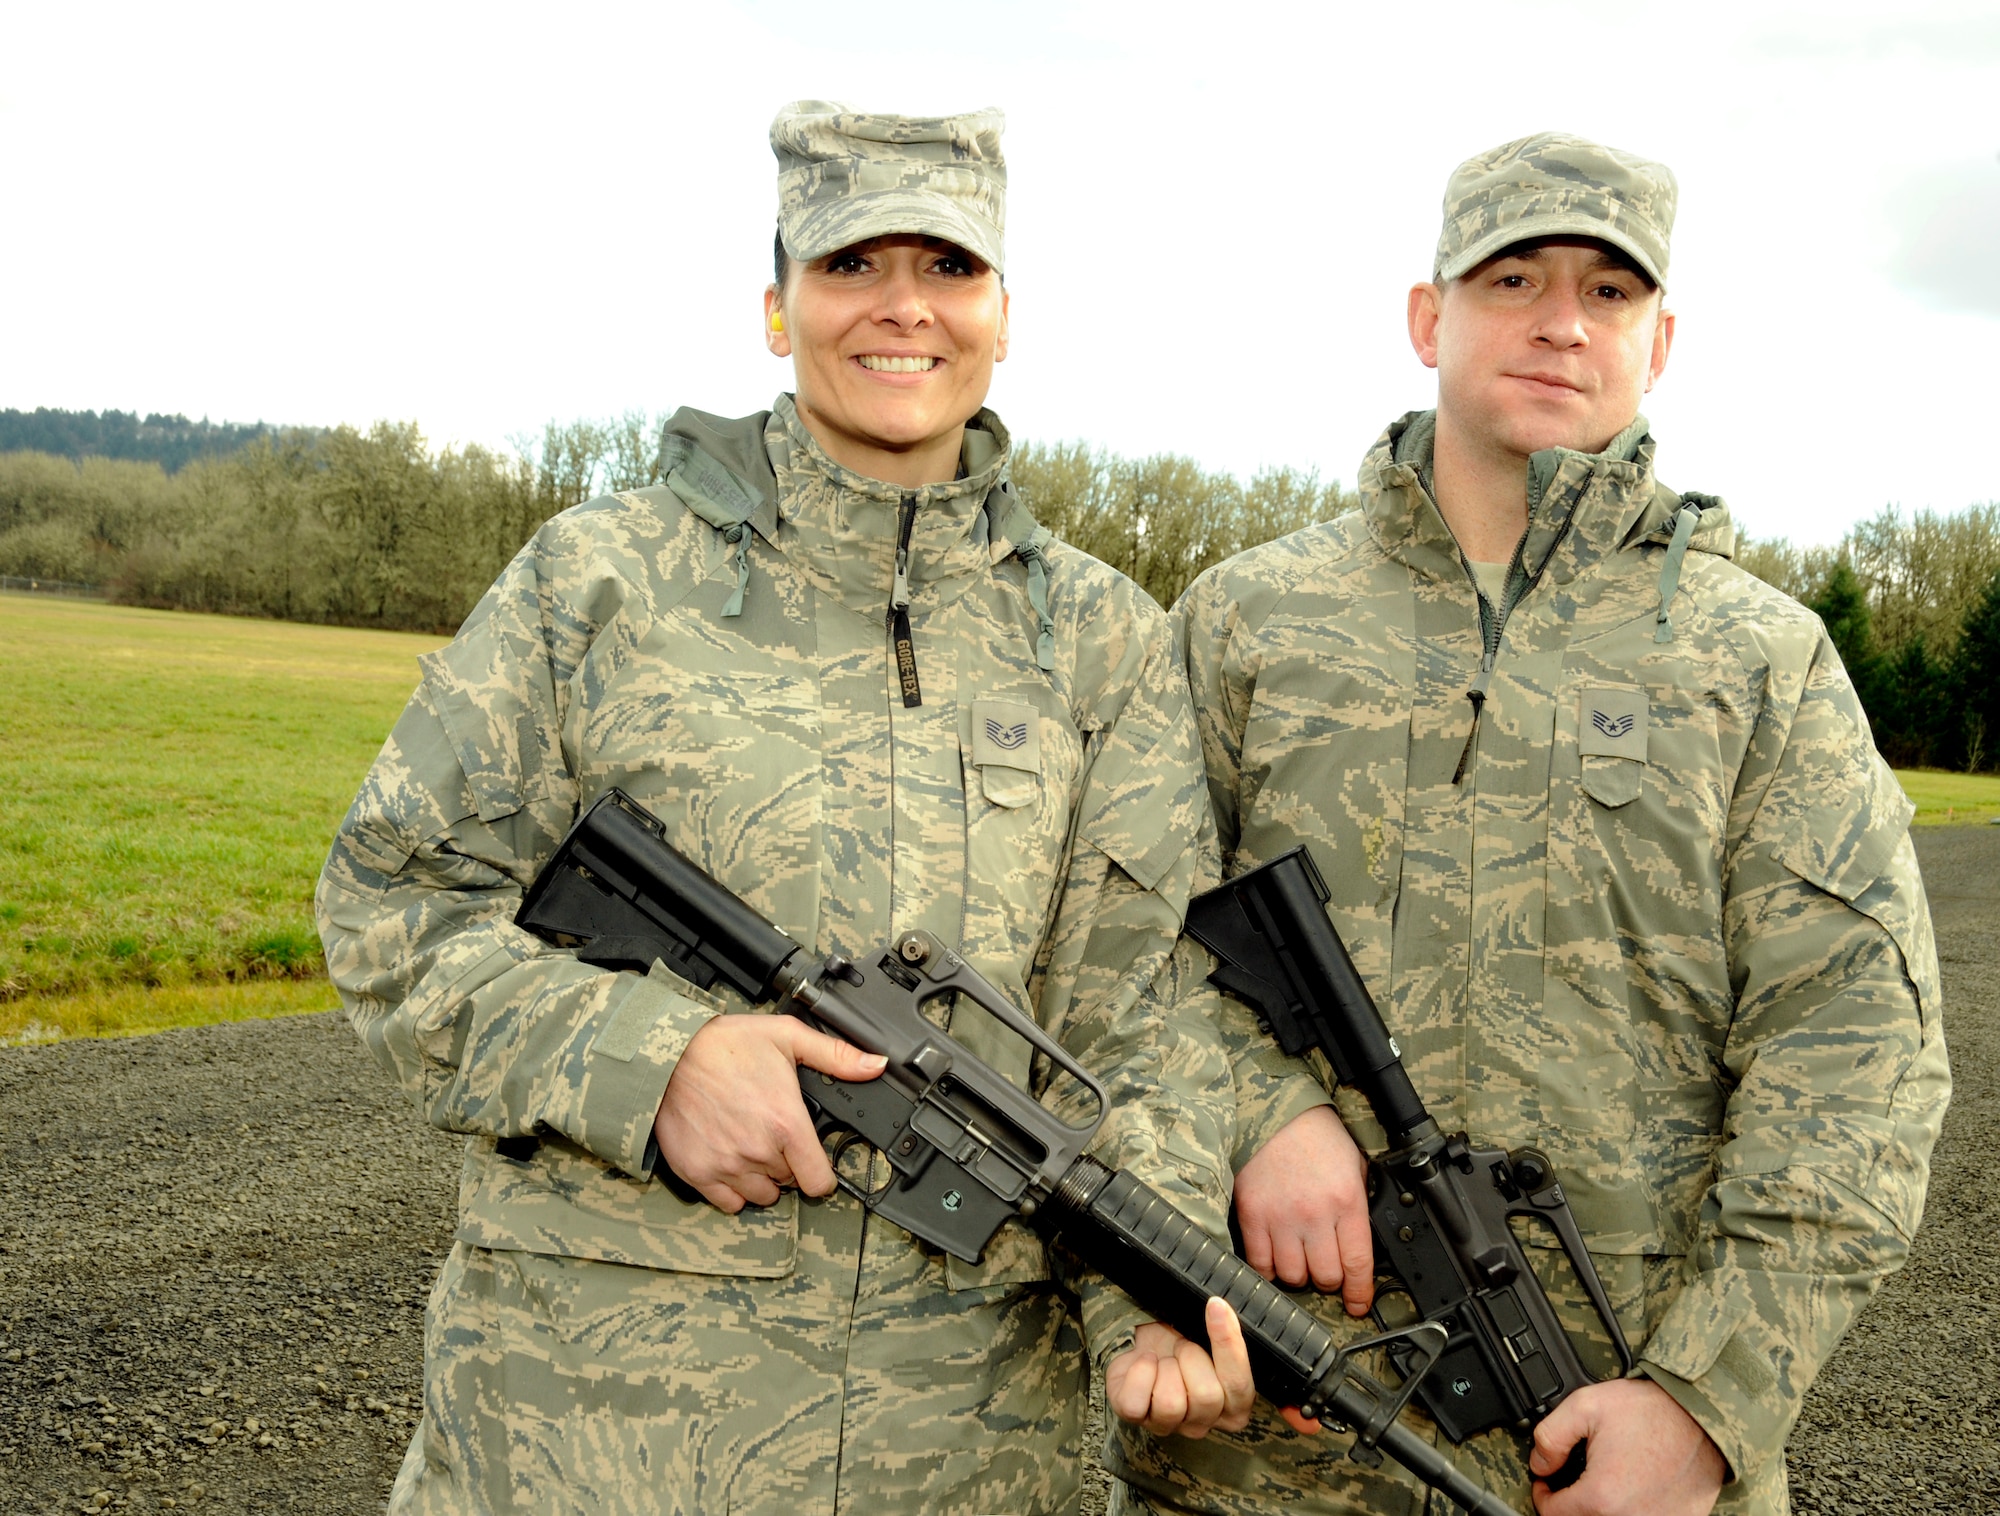 Oregon Air National Guard Tech. Sgt. Michelle Lowe and Staff Sgt. Richard Lowe, of the 116th Air Control Squadron prepare to qualify with their weapons at Camp Adair, Ore., on February 17, 2011. The married Airmen plan to deploy together to the Middle East in March of 2011 and are finishing their pre-deployment training before they leave to support Operation Enduring Freedom. (U.S. Air Force photograph by Tech. Sgt. John Hughel) 